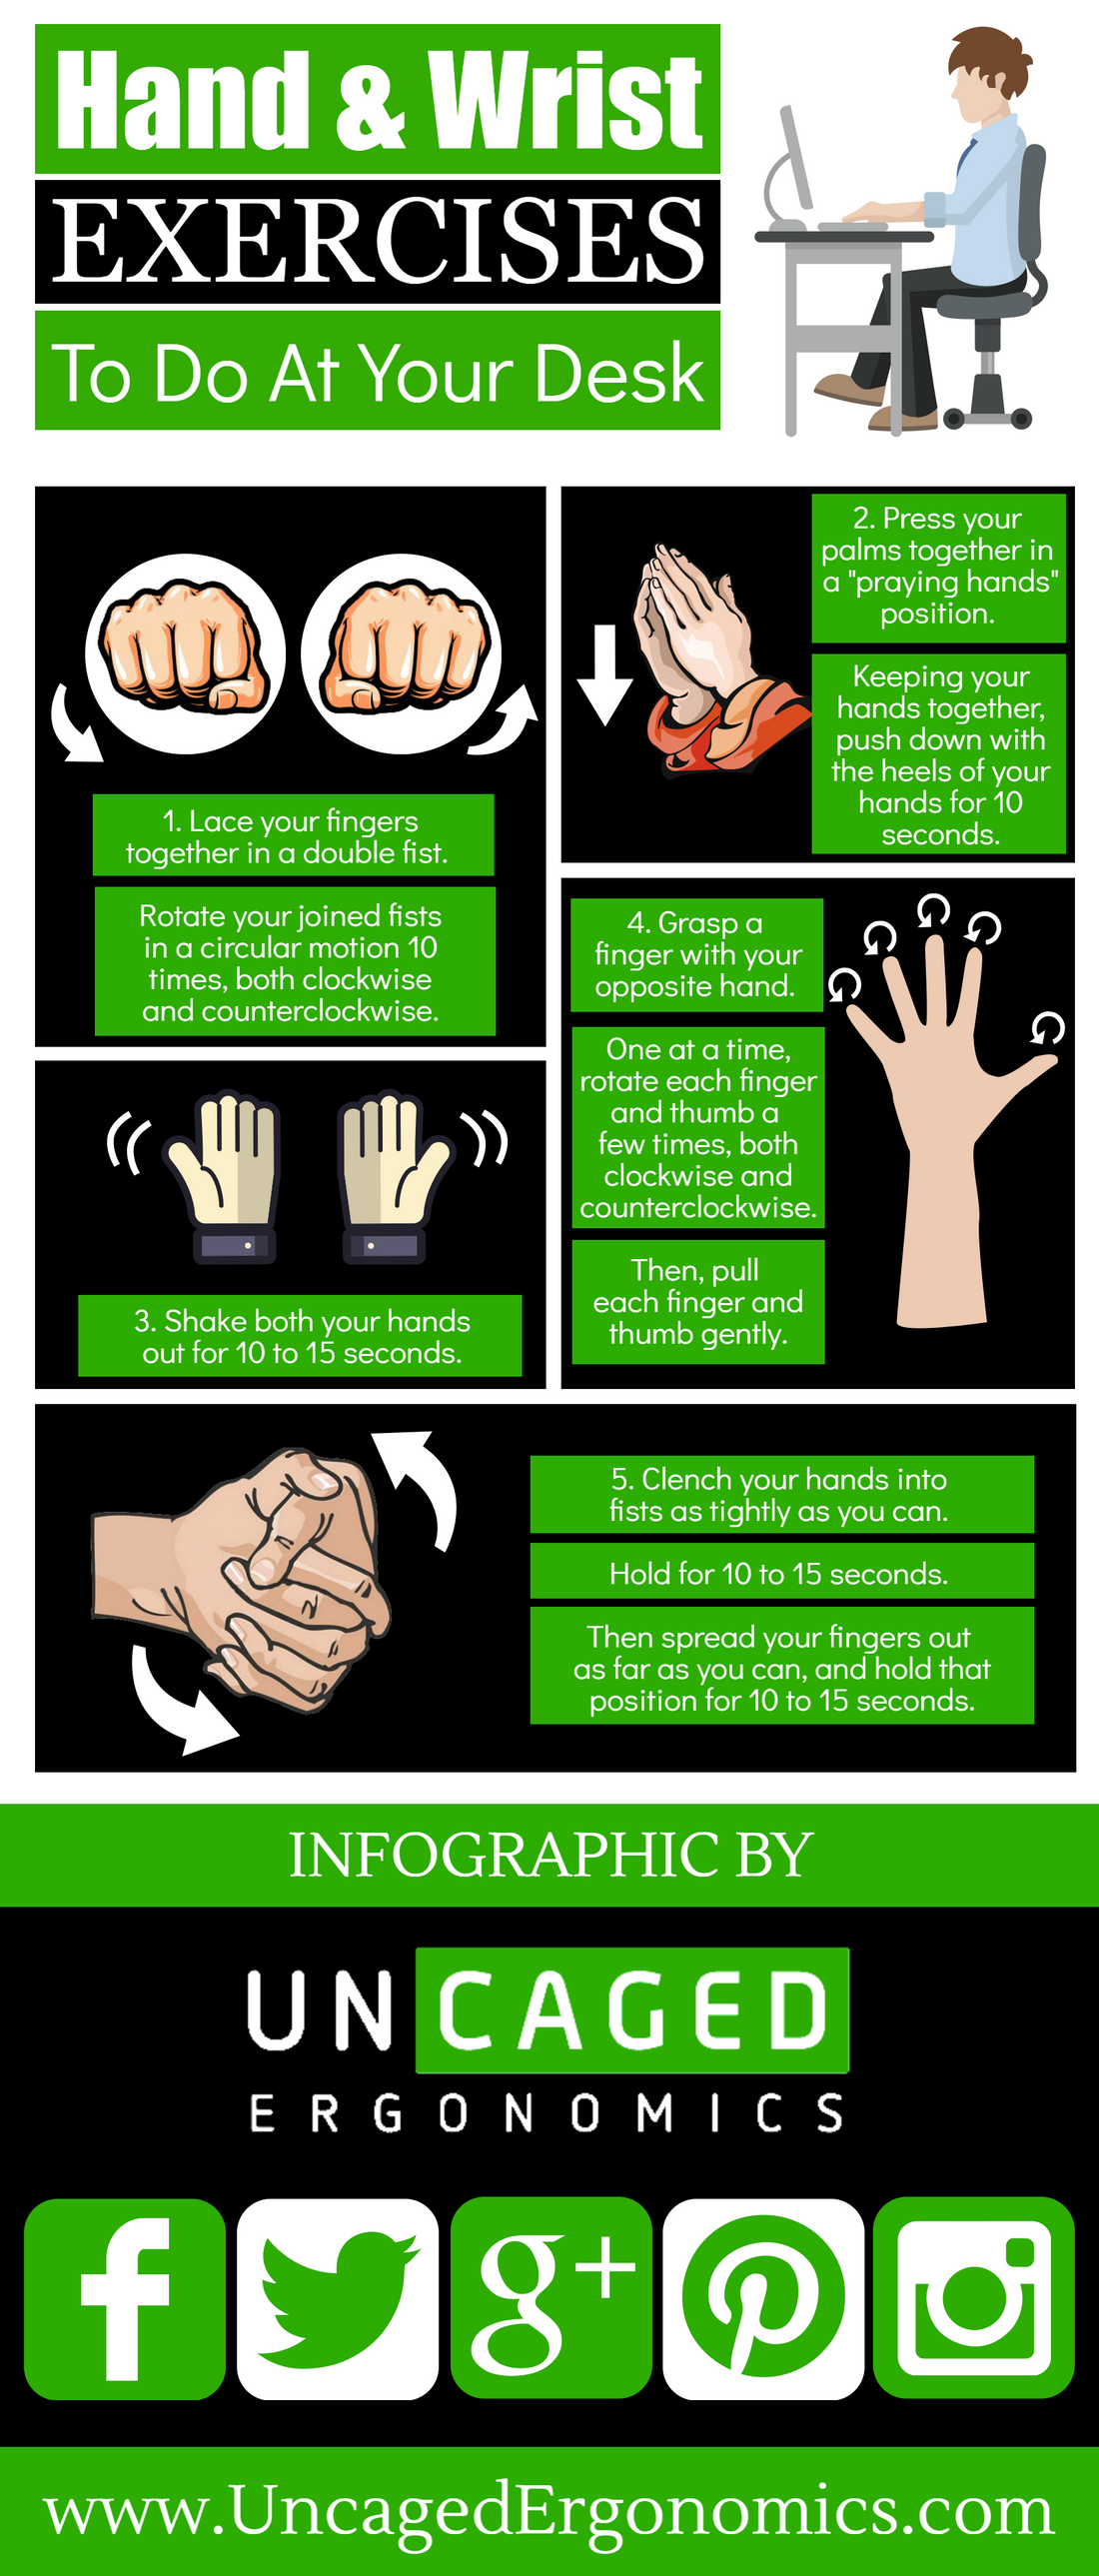 Hand & Wrist Exercises To Do At Your Desk